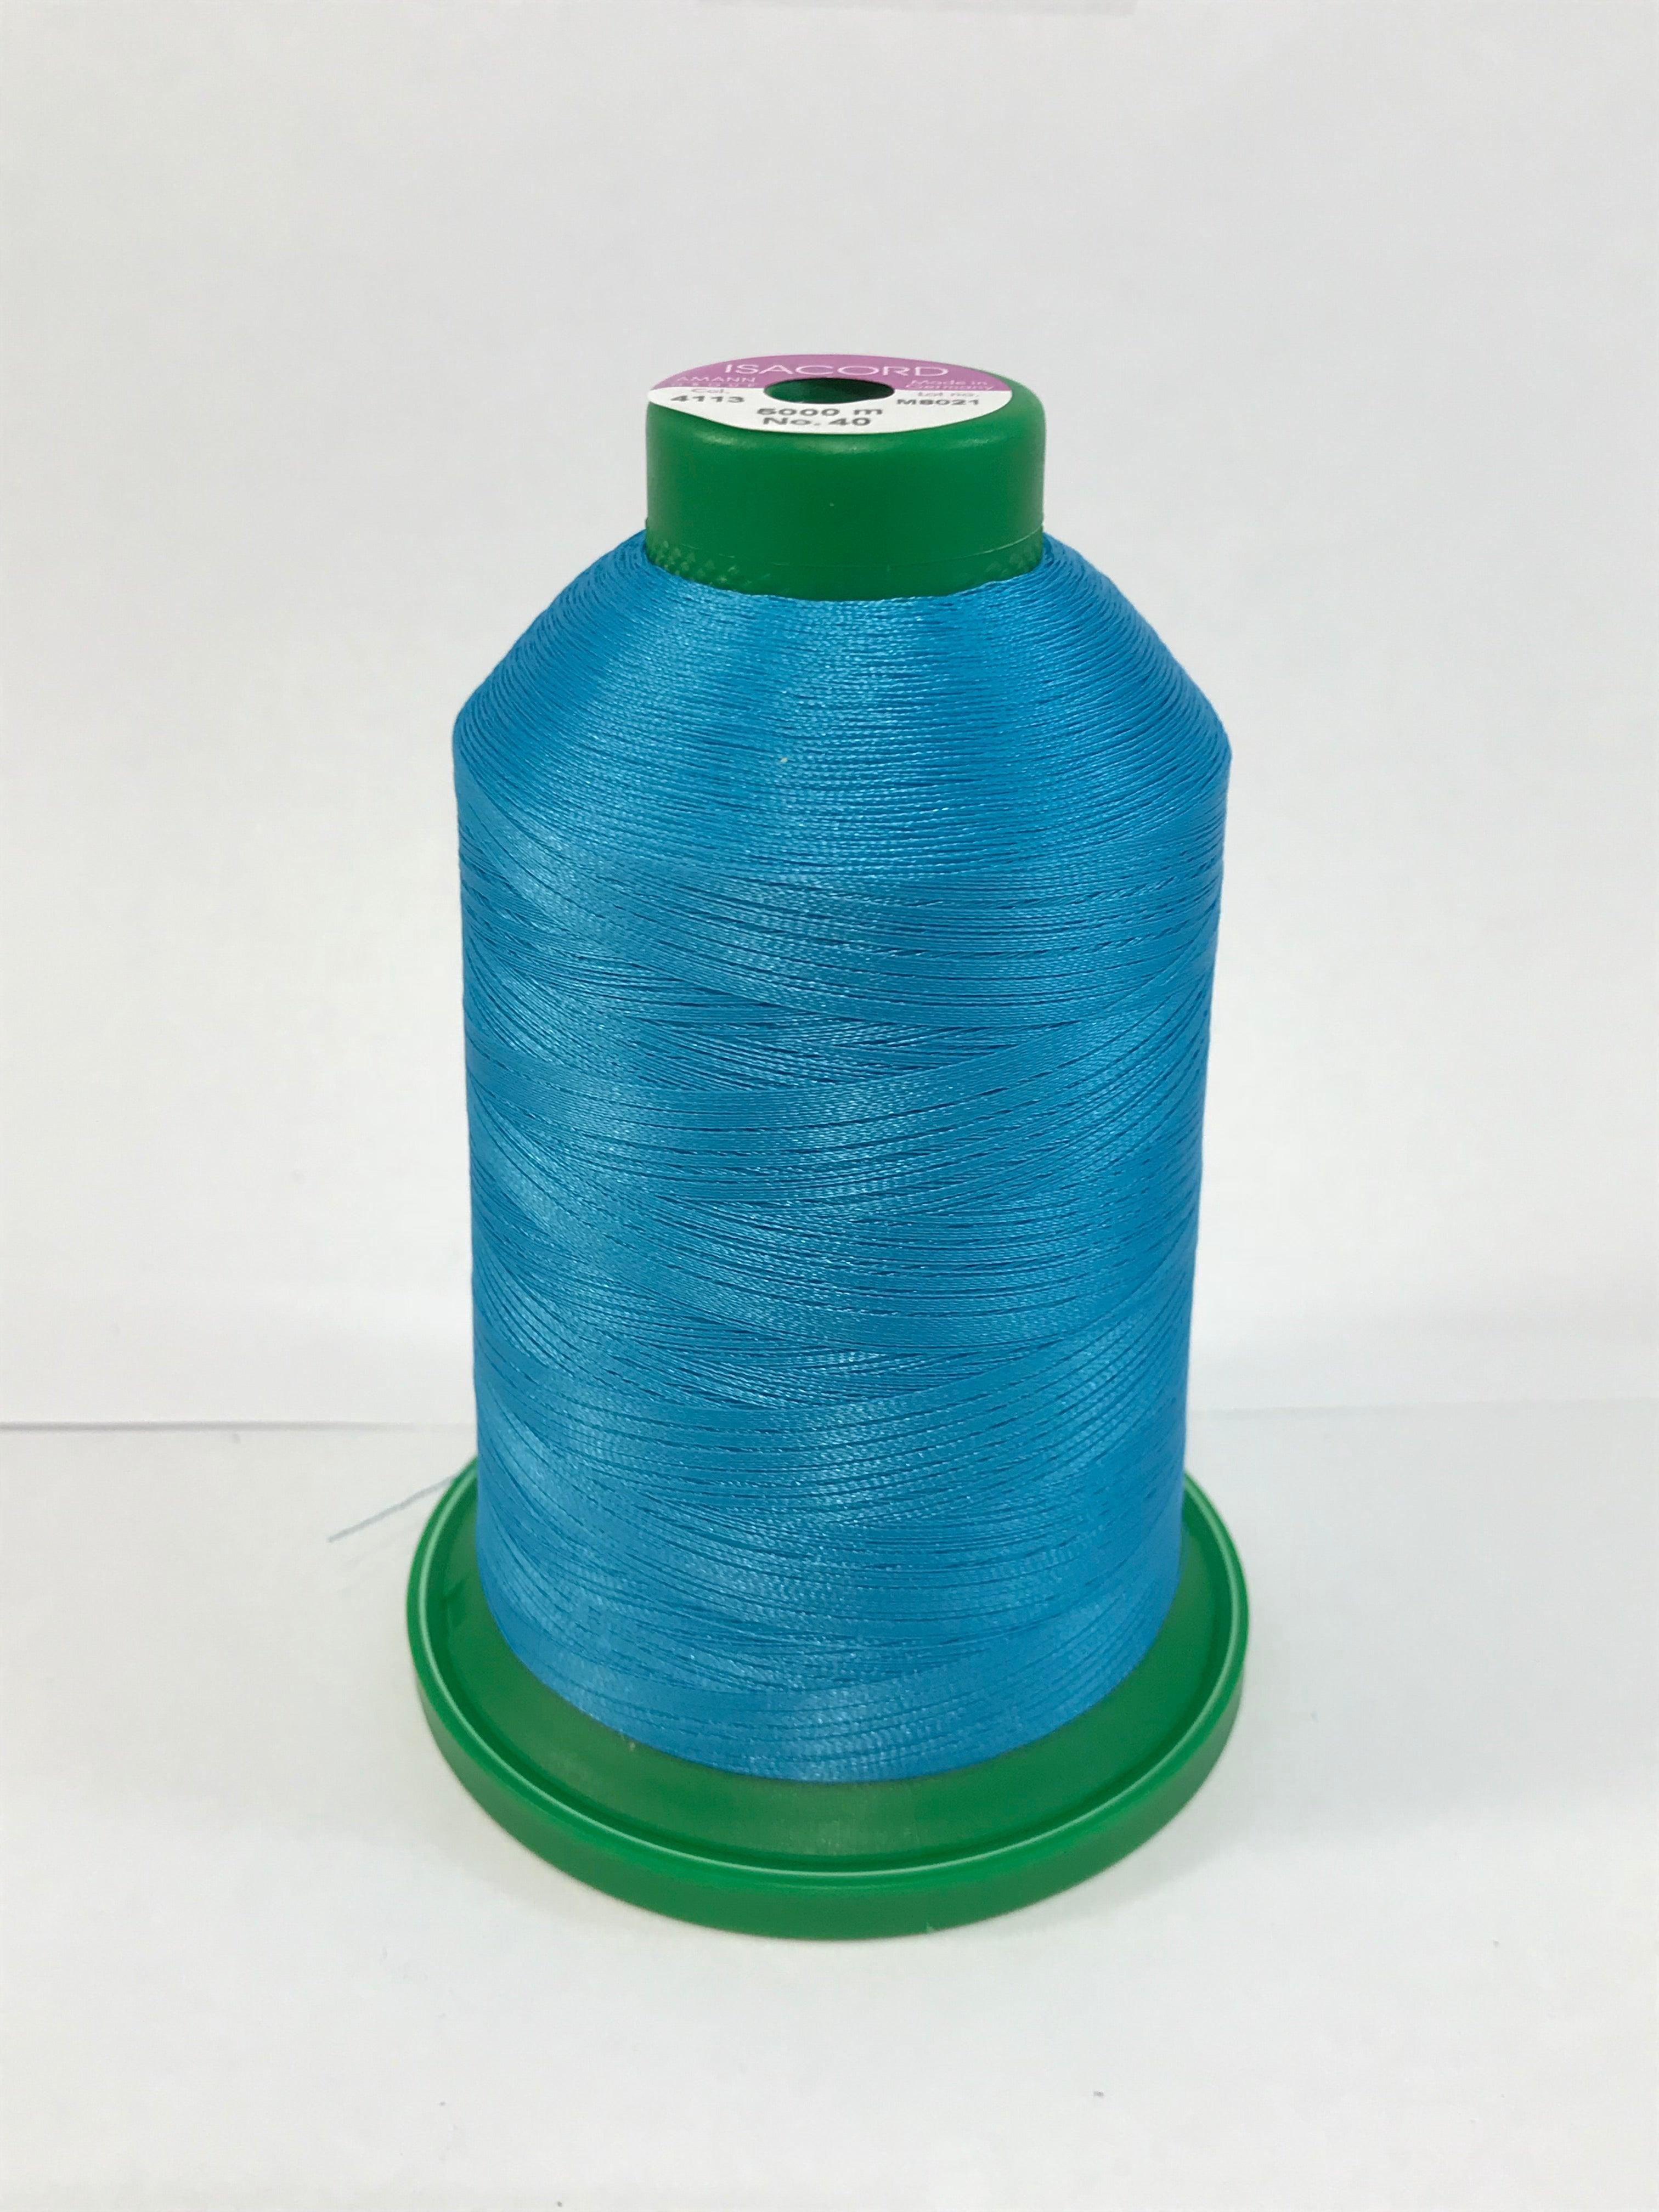 4113 - ALEXIS BLUE - ISACORD EMBROIDERY THREAD 40 WT